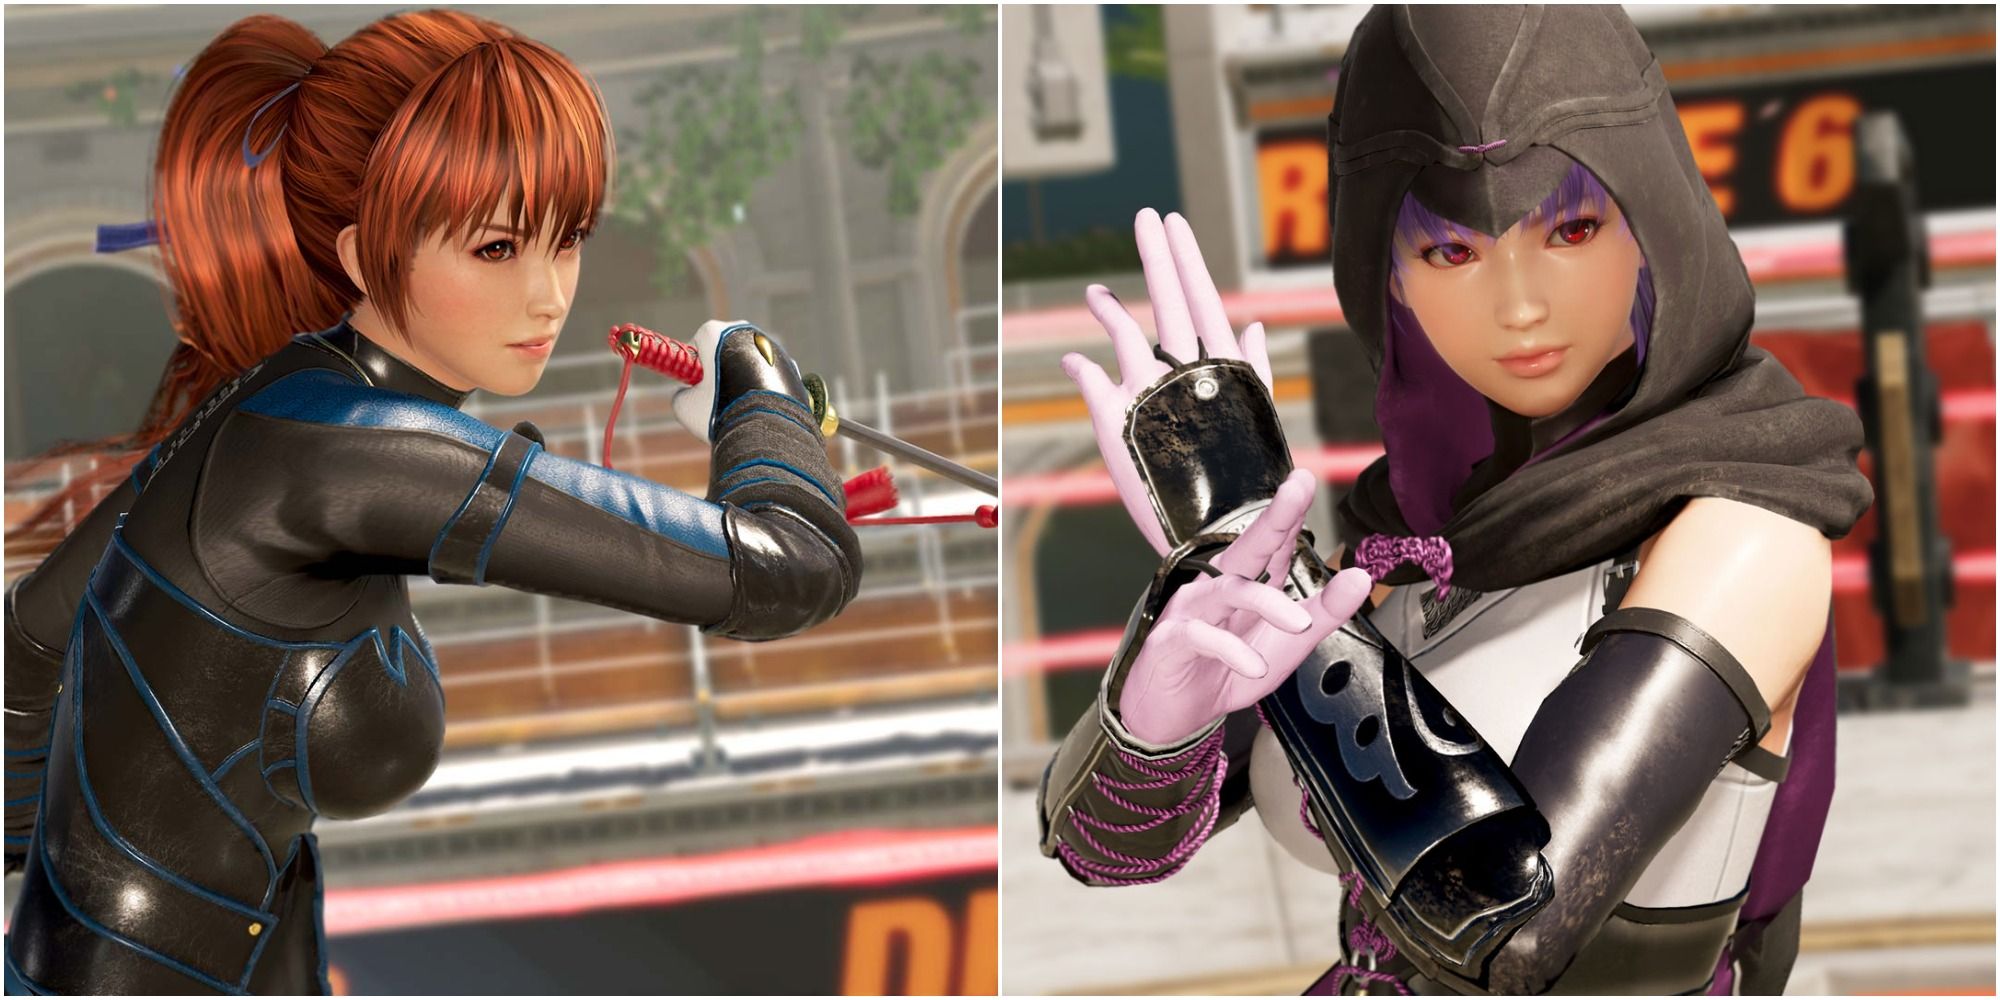 Dead Or Alive Kasumi and Ayane's sibling rivalry